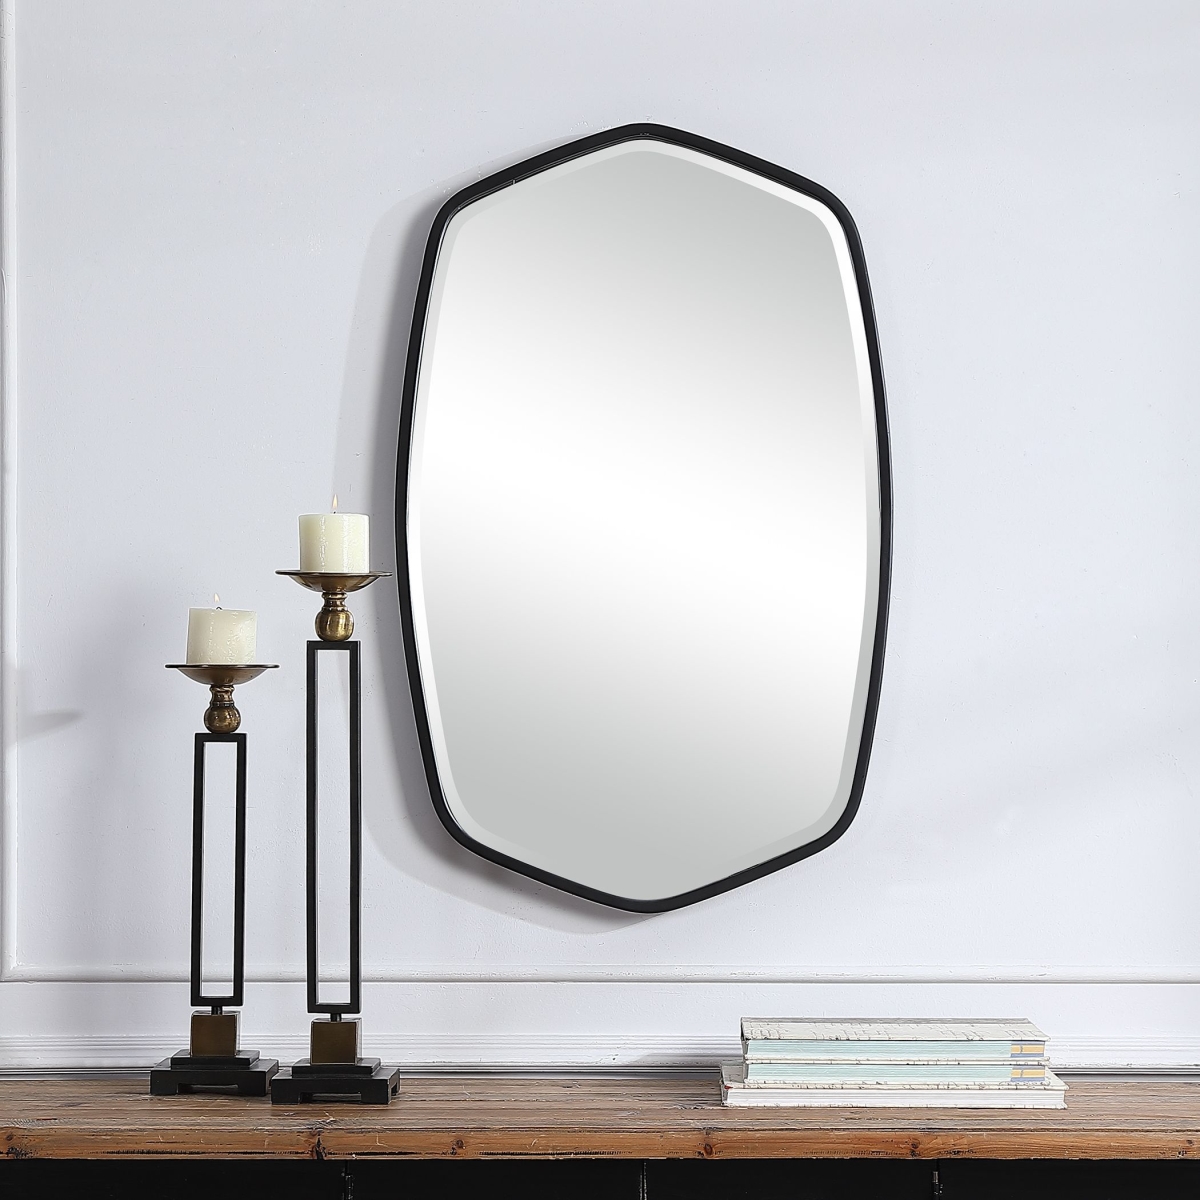 Picture of 212 Main 09699 40.16 x 26.4 x 3.94 in. Duronia Iron Mirror  Black